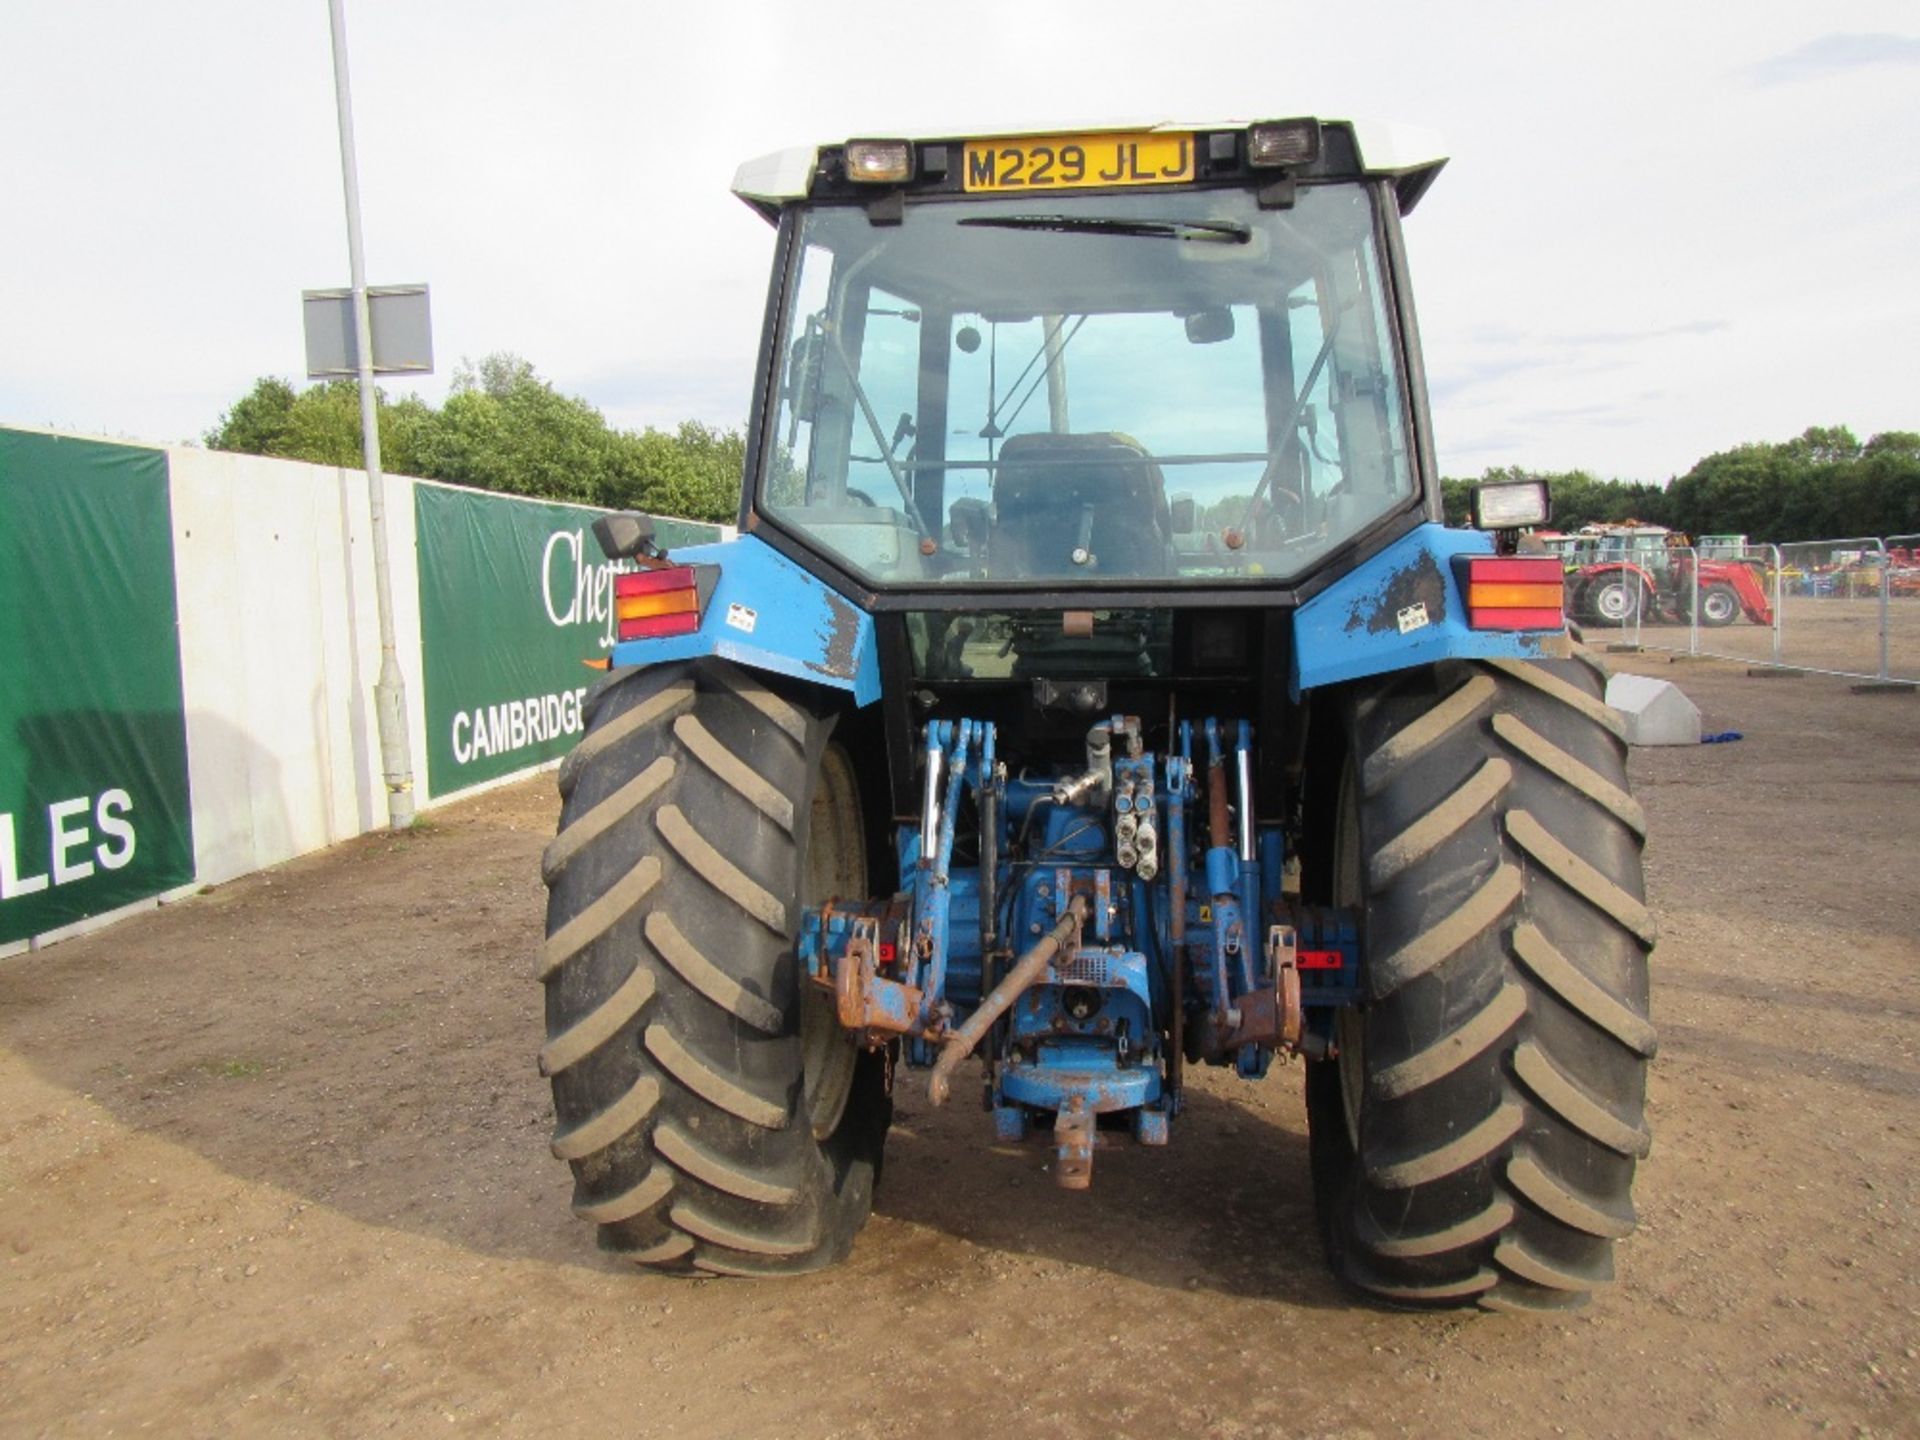 Ford New Holland 8340 SLE 40k Tractor with Air Con. Reg. No. M229 JLJ - Image 4 of 10